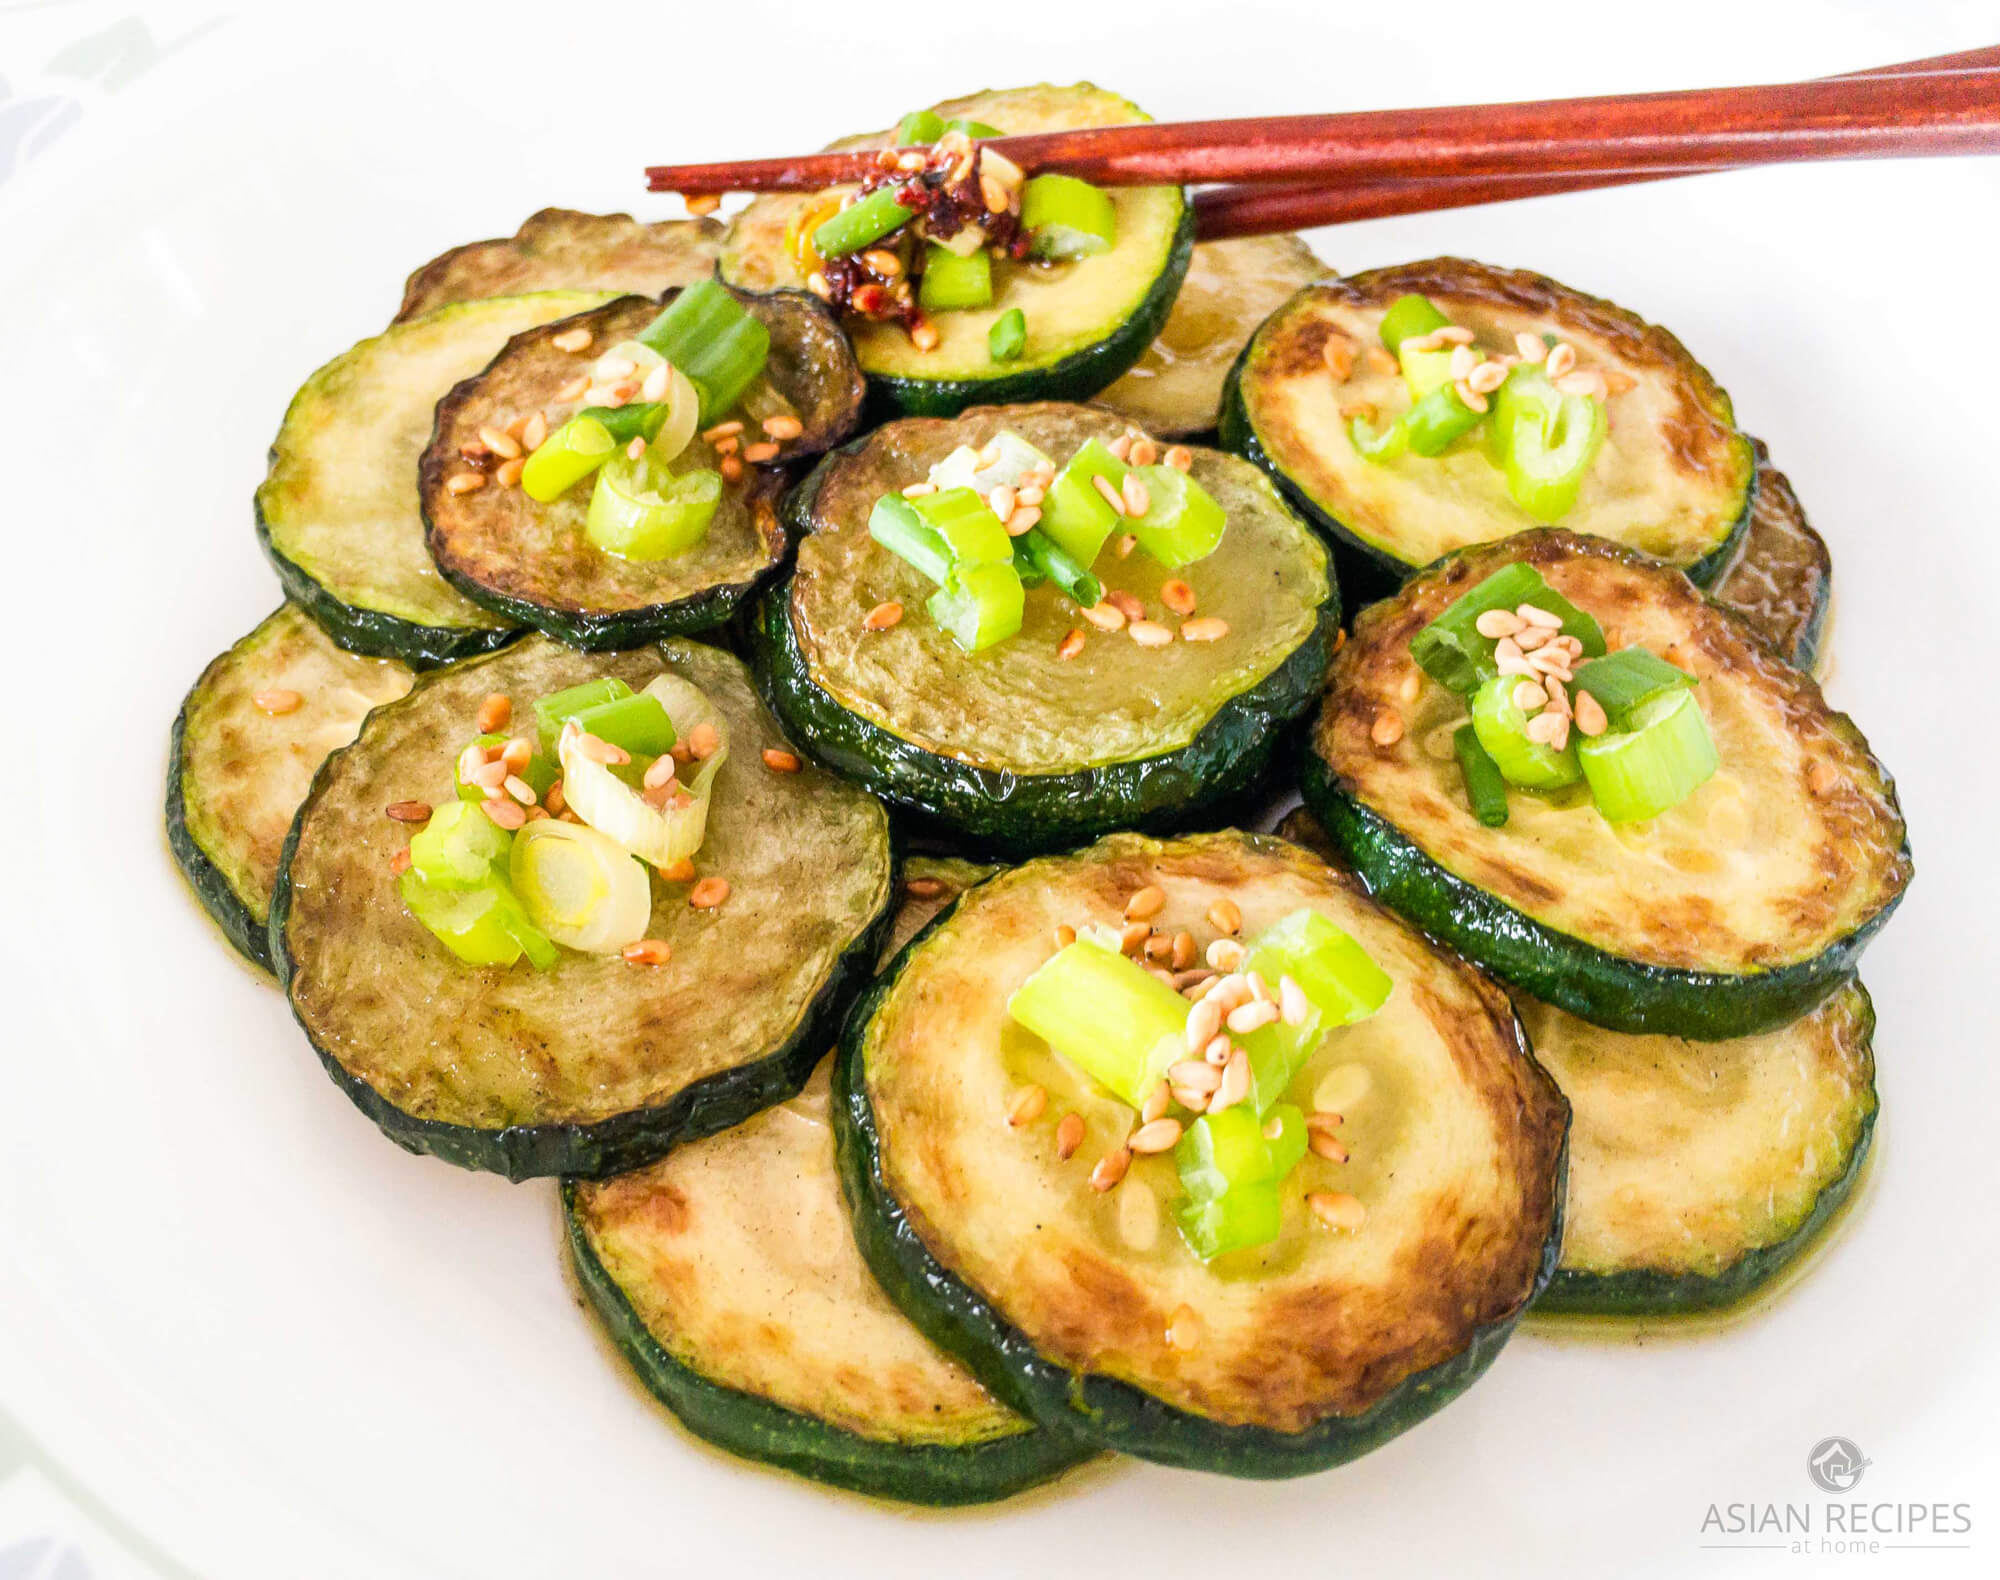 Fresh zucchini is pan-fried with delicious Asian flavors and ingredients. This easy Asian pan-fried zucchini is a healthy recipe that is a great side dish at any time of the year.